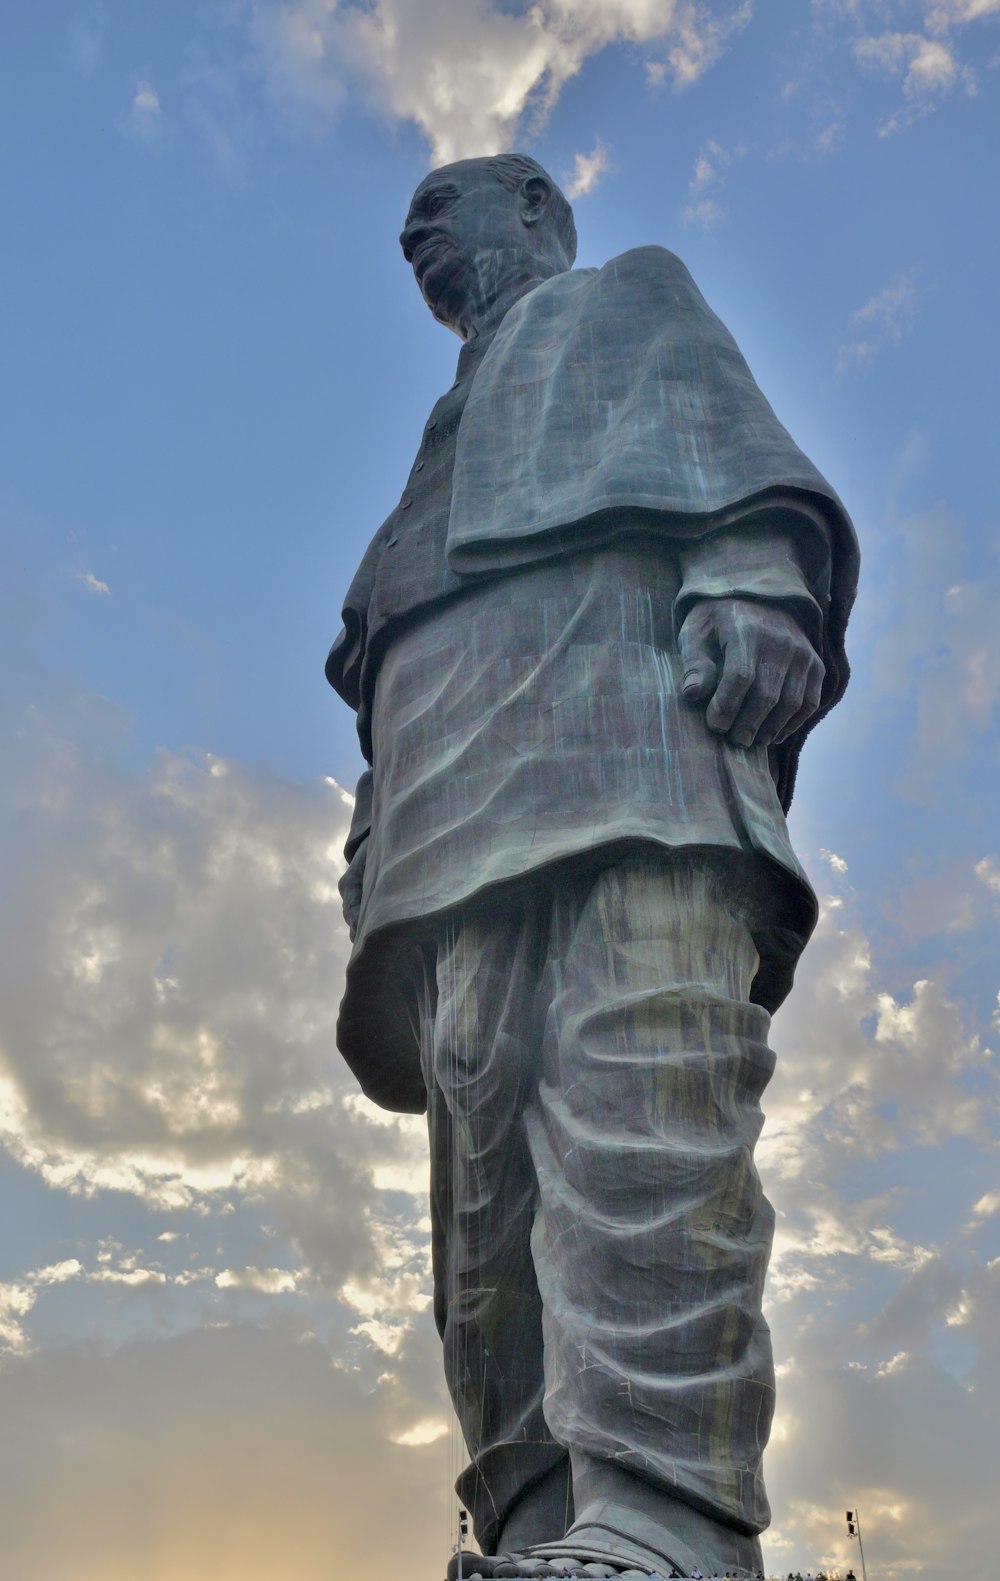 a large statue of a man standing under a cloudy sky